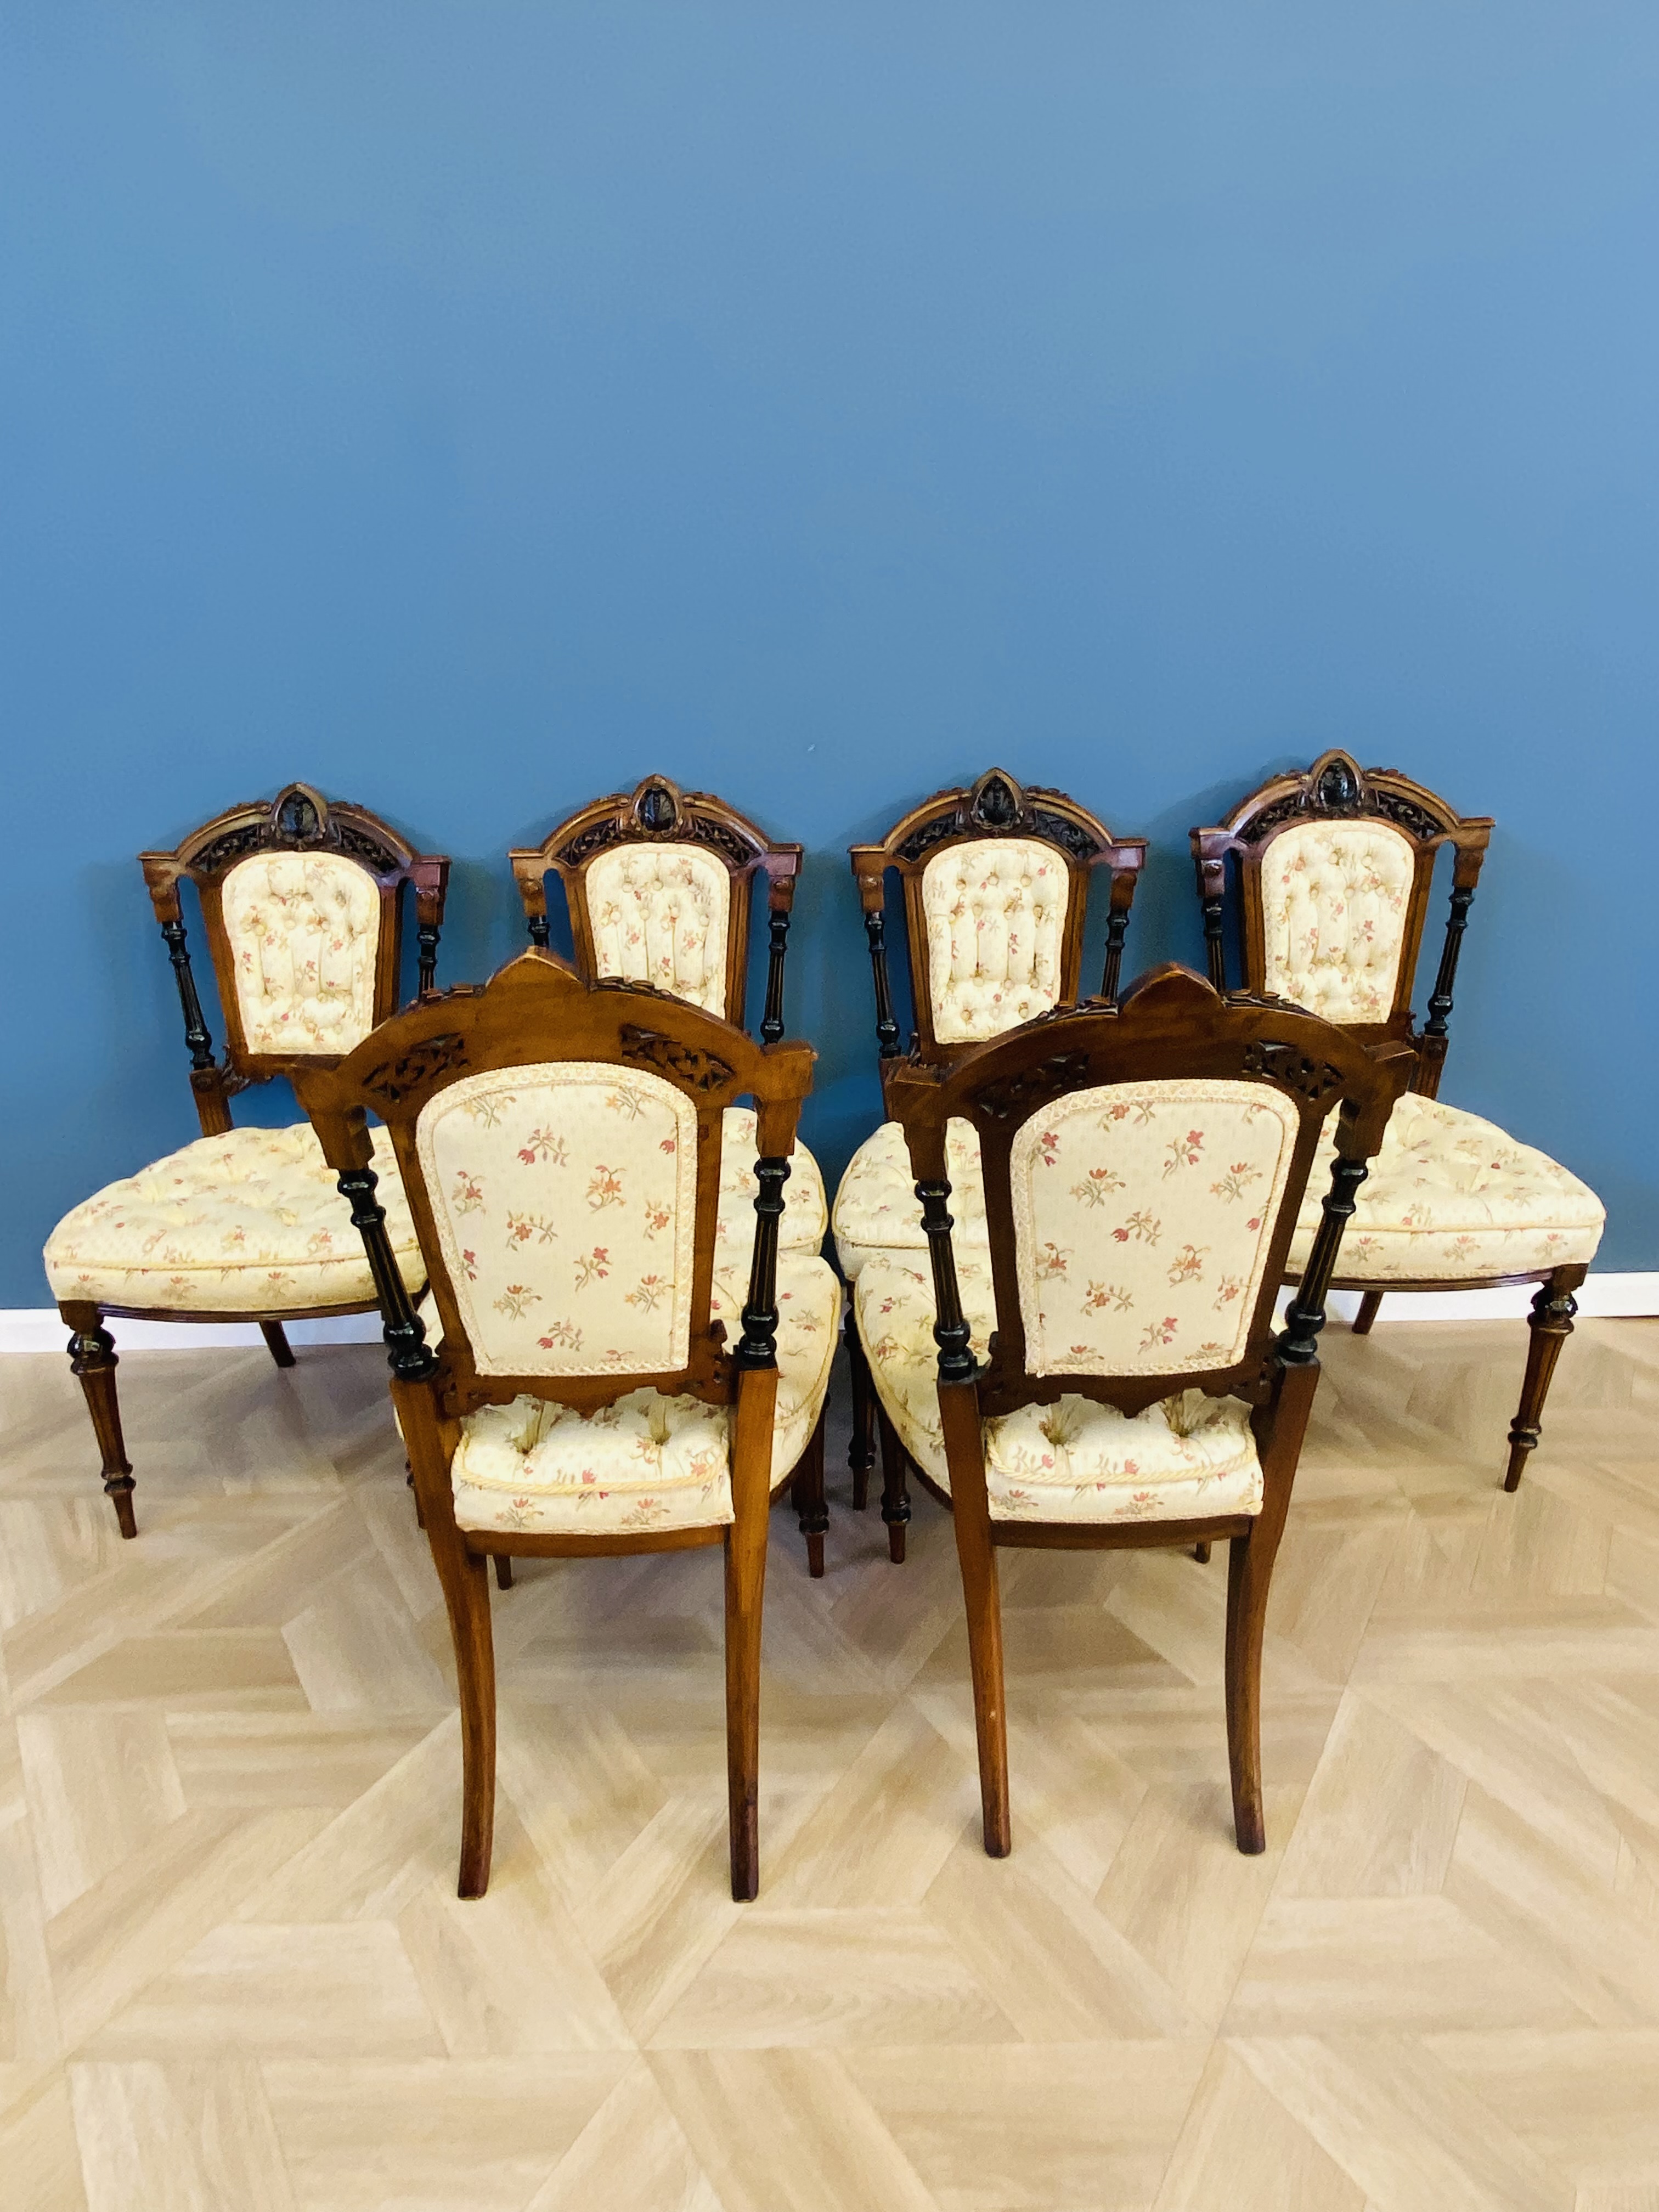 Set of six Victorian walnut chairs - Image 5 of 9